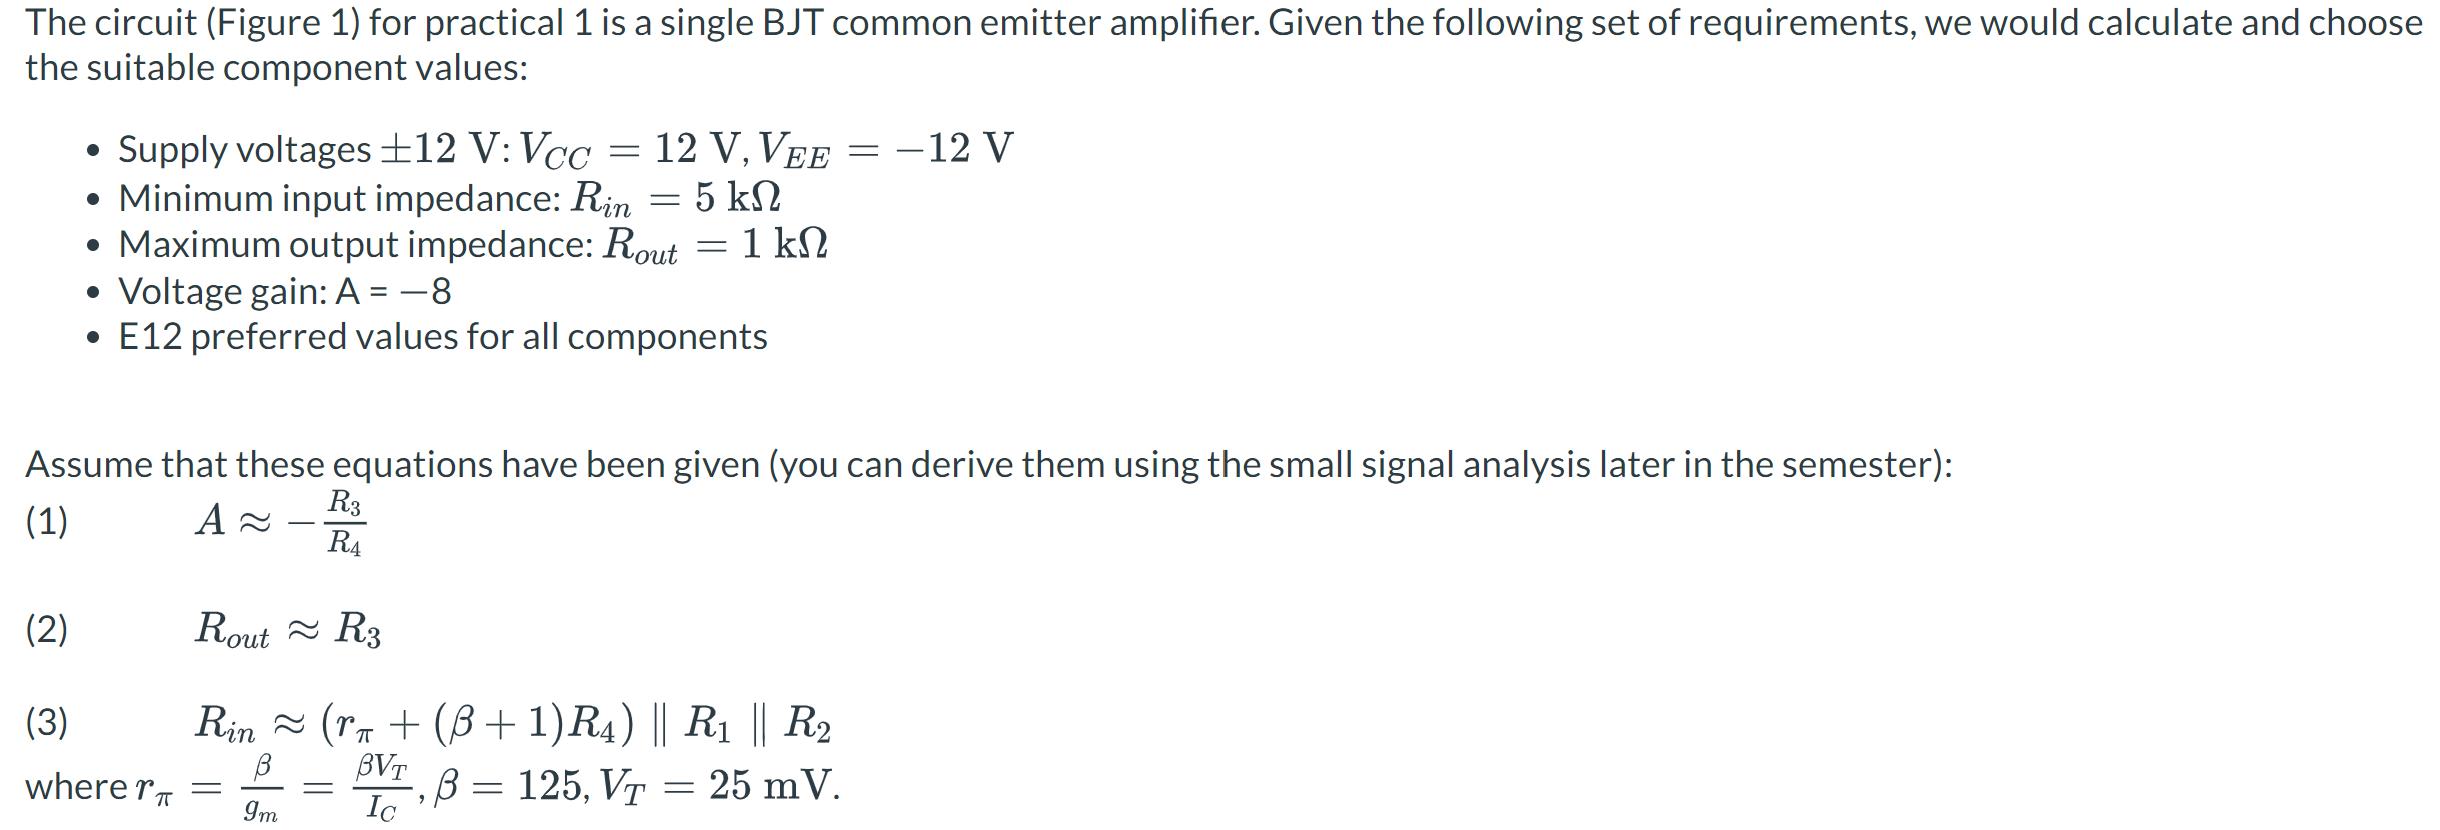 The circuit (Figure 1) for practical 1 is a single BJT common emitter amplifier. Given the following set of requirements, we